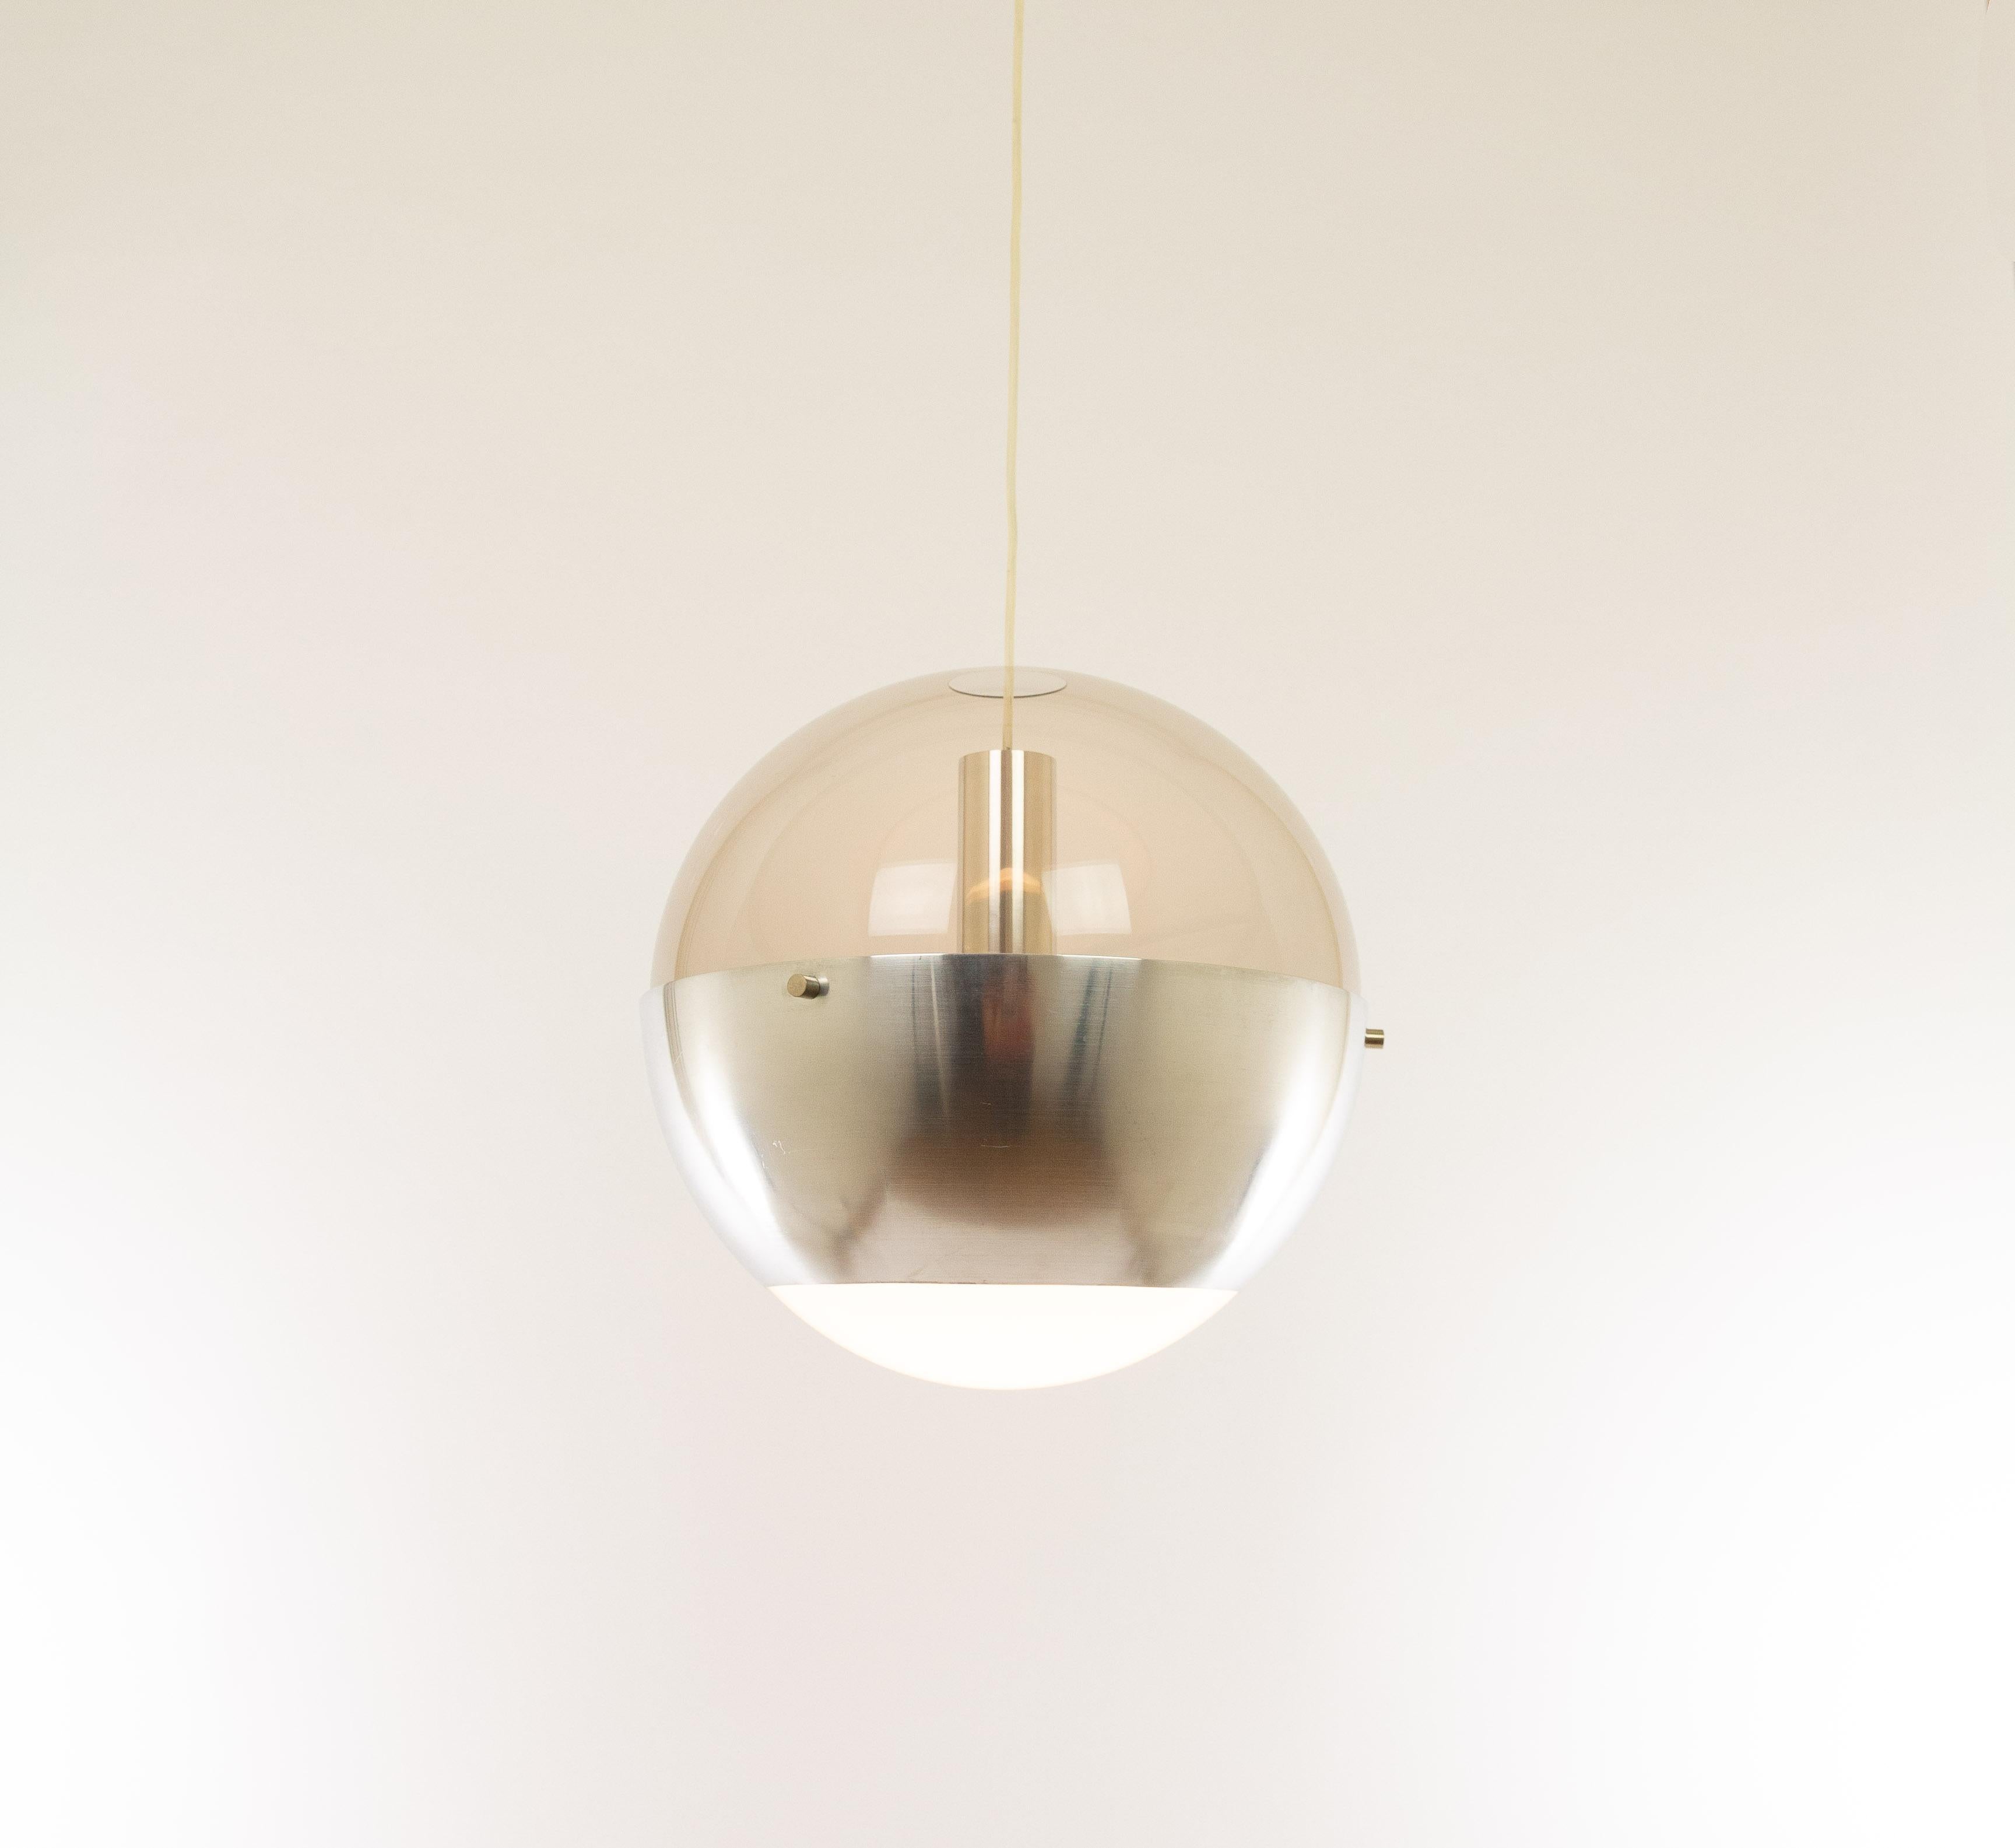 Rare pendant Luna designed by H. Fillekes for the Dutch company Artiforte, 1950s.

The lamp is made of a matted nickel ring with a Perspex top and a white opaline bottom. This special construction creates a beautiful light effect when switched